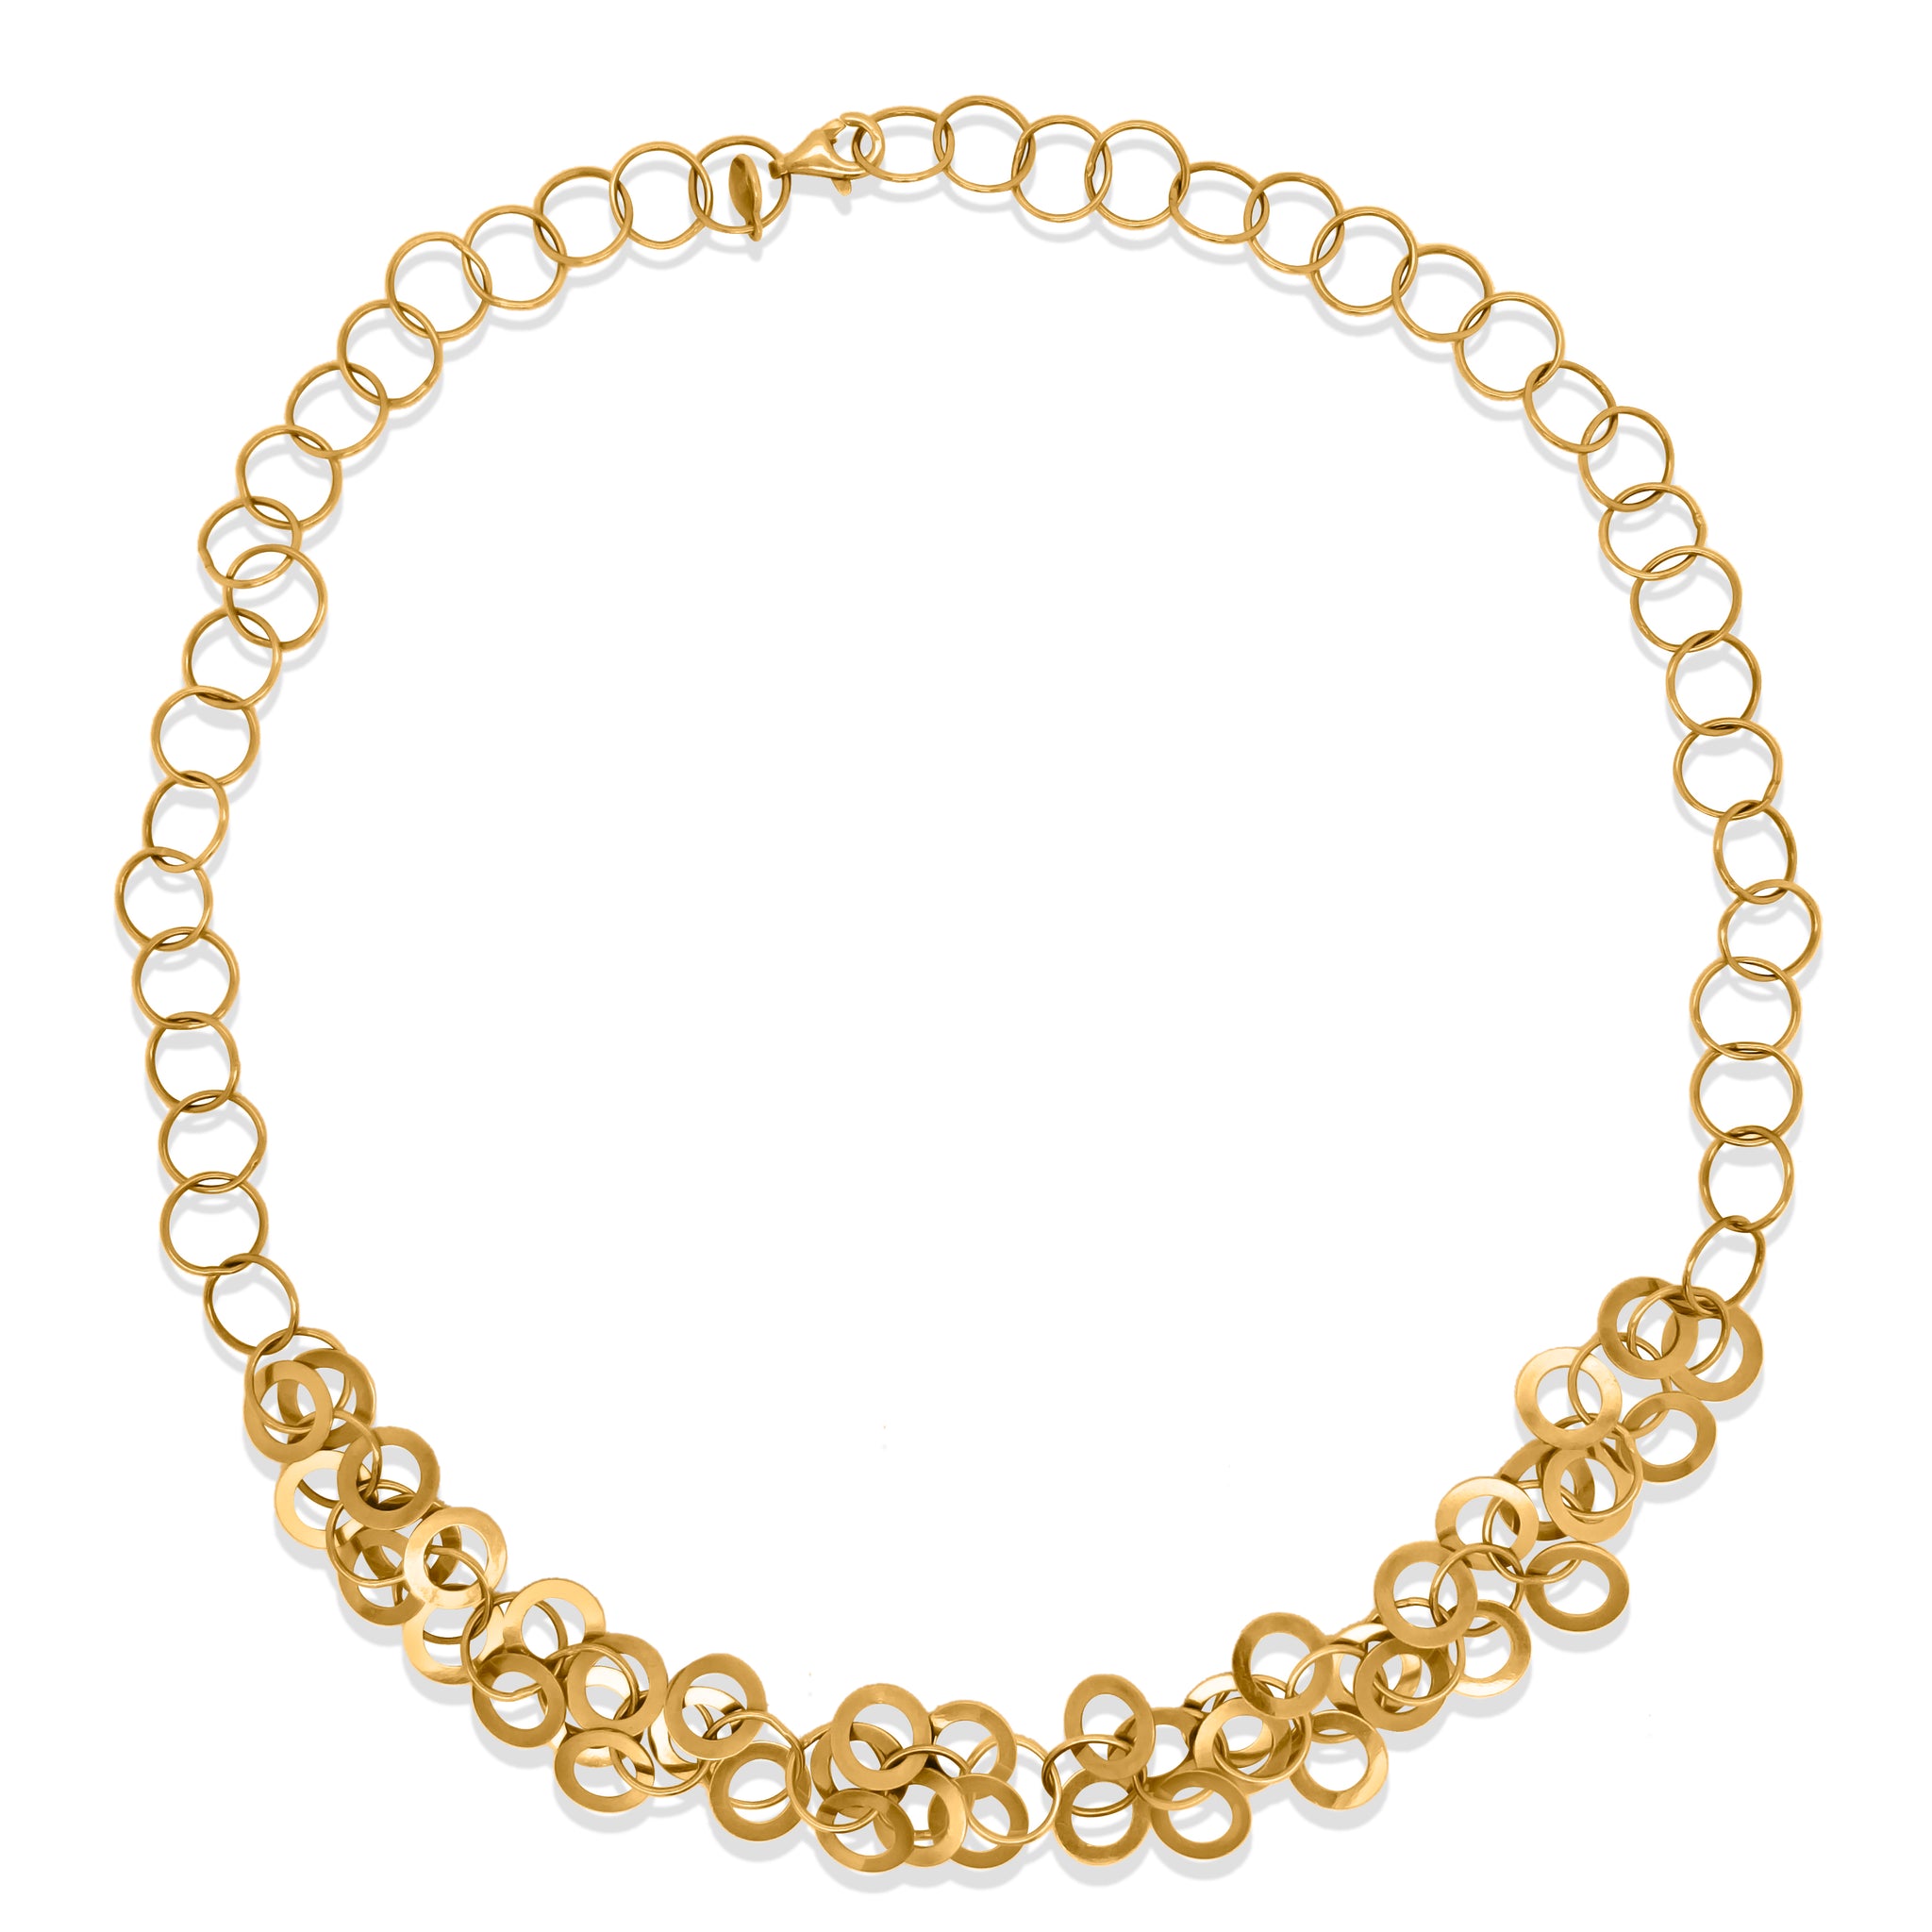 Inter-connecting Circles Gold Chain Necklace - Lueur Jewelry